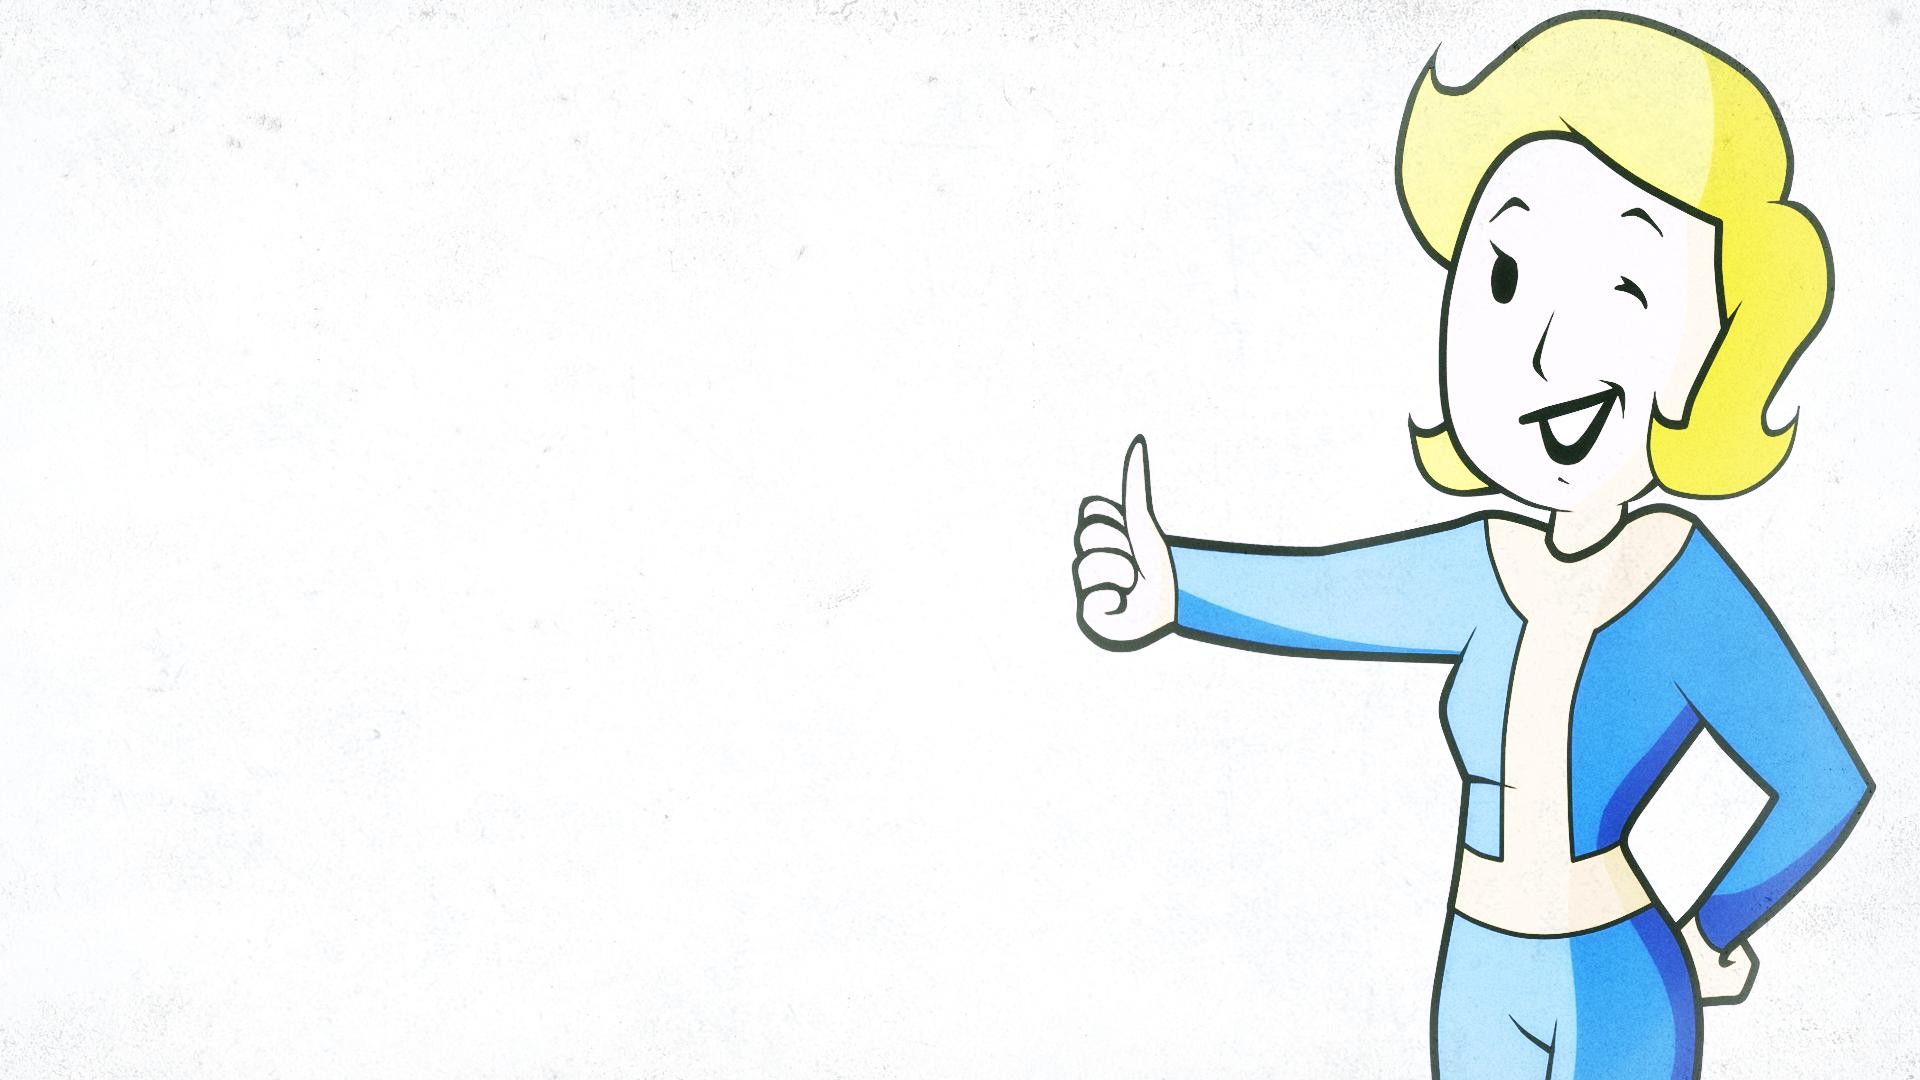 Vault Girl thanks you for all the support!